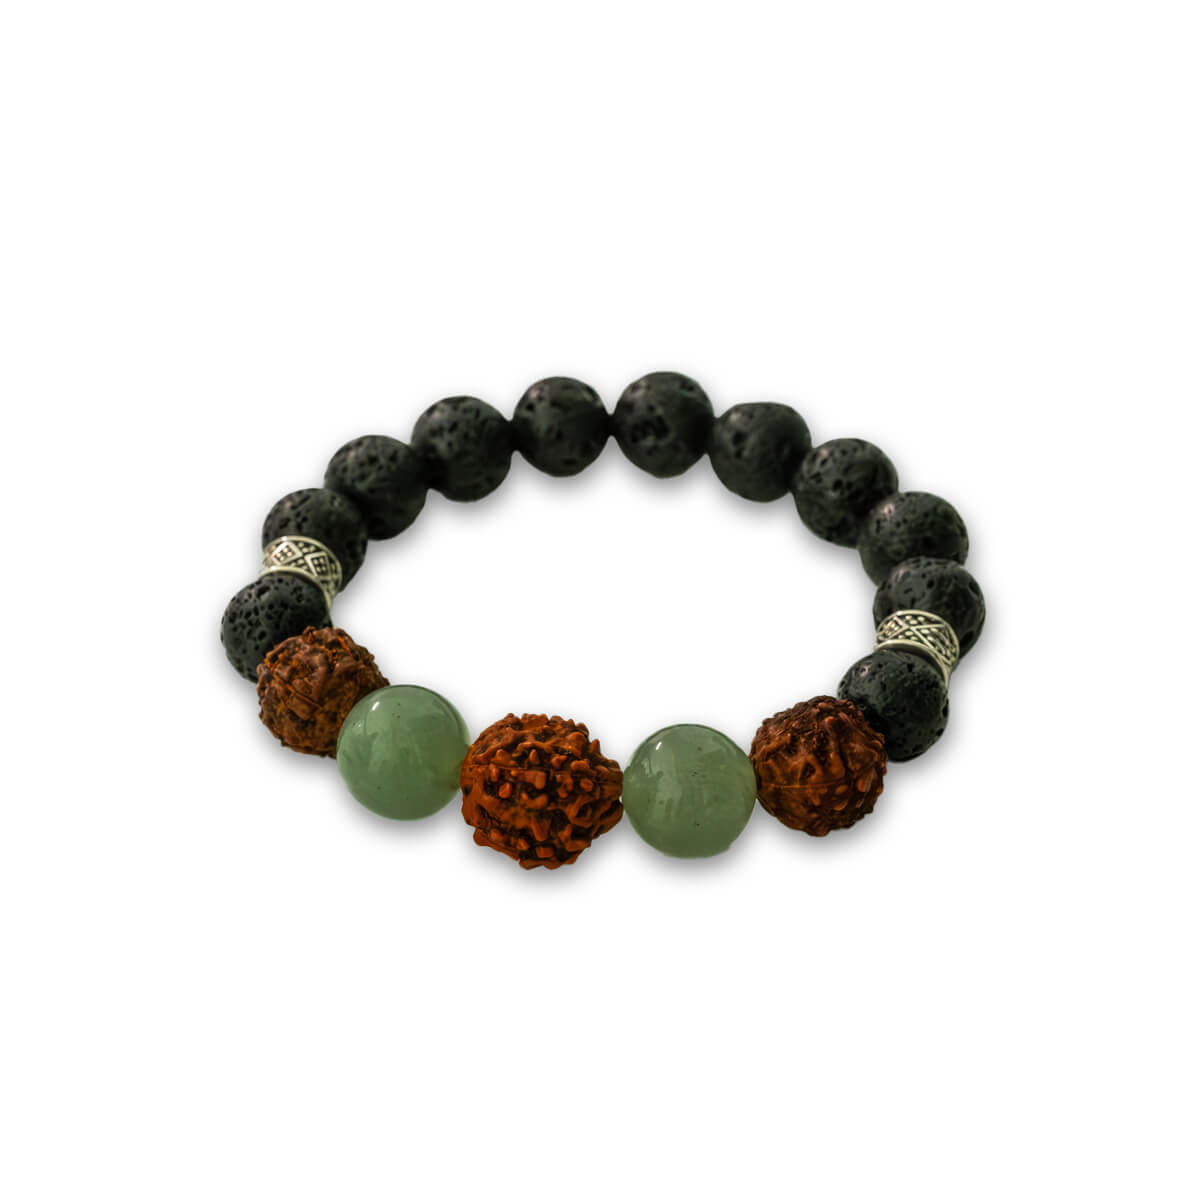 Frosted Green Aventurine, Rudraksha, and Black Lava with Silver Charms Men's Bracelet